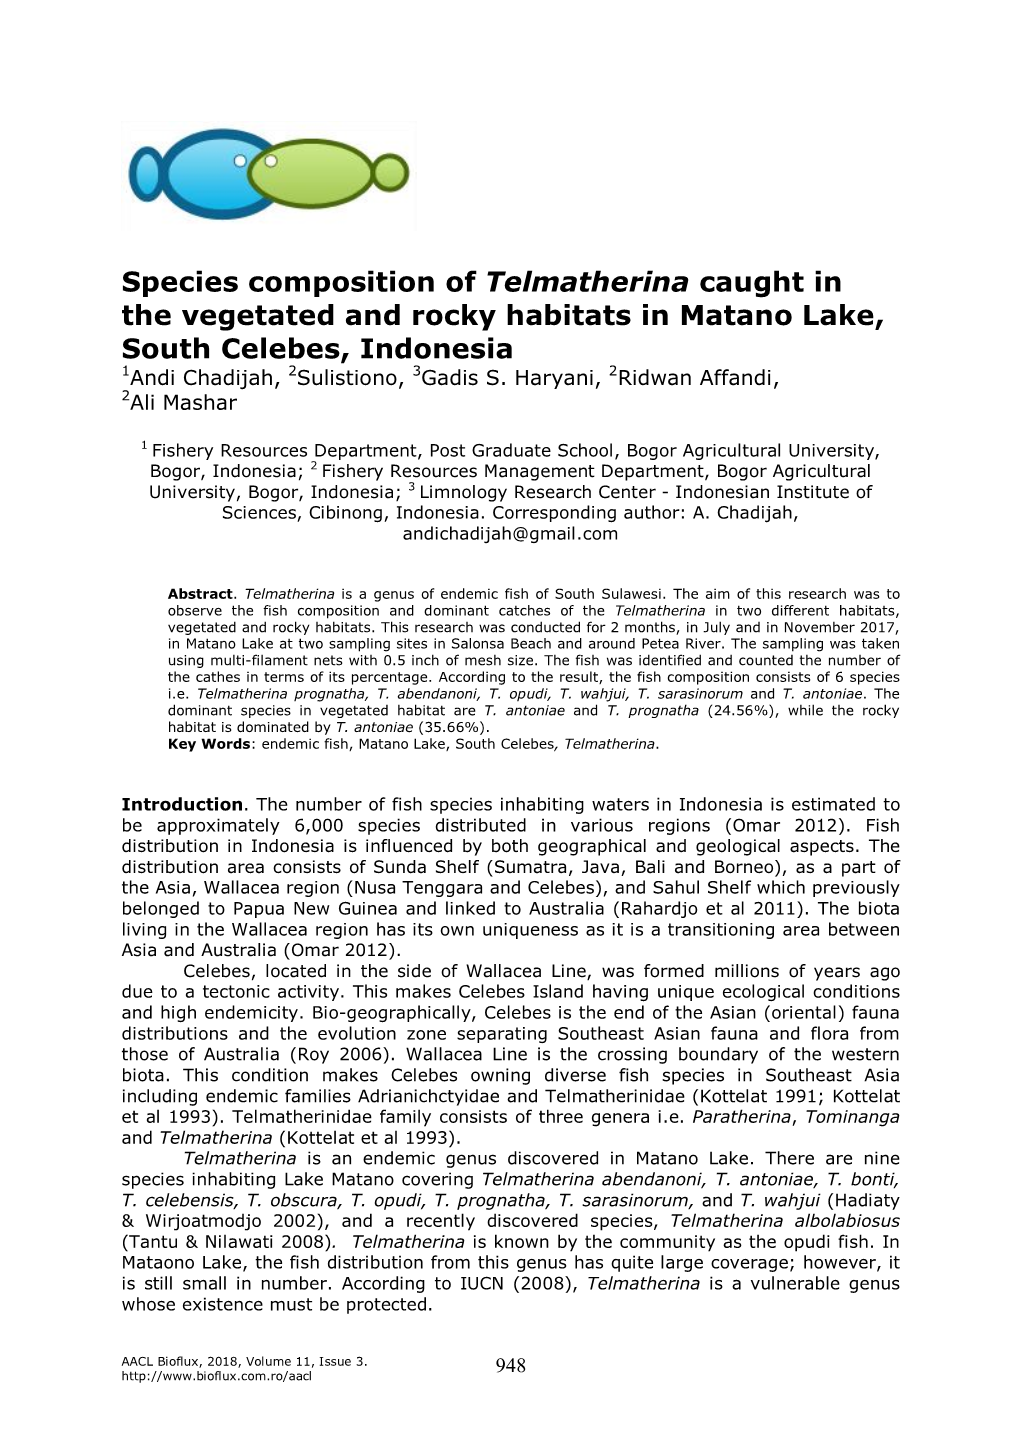 Species Composition of Telmatherina Caught in the Vegetated and Rocky Habitats in Matano Lake, South Celebes, Indonesia 1Andi Chadijah, 2Sulistiono, 3Gadis S